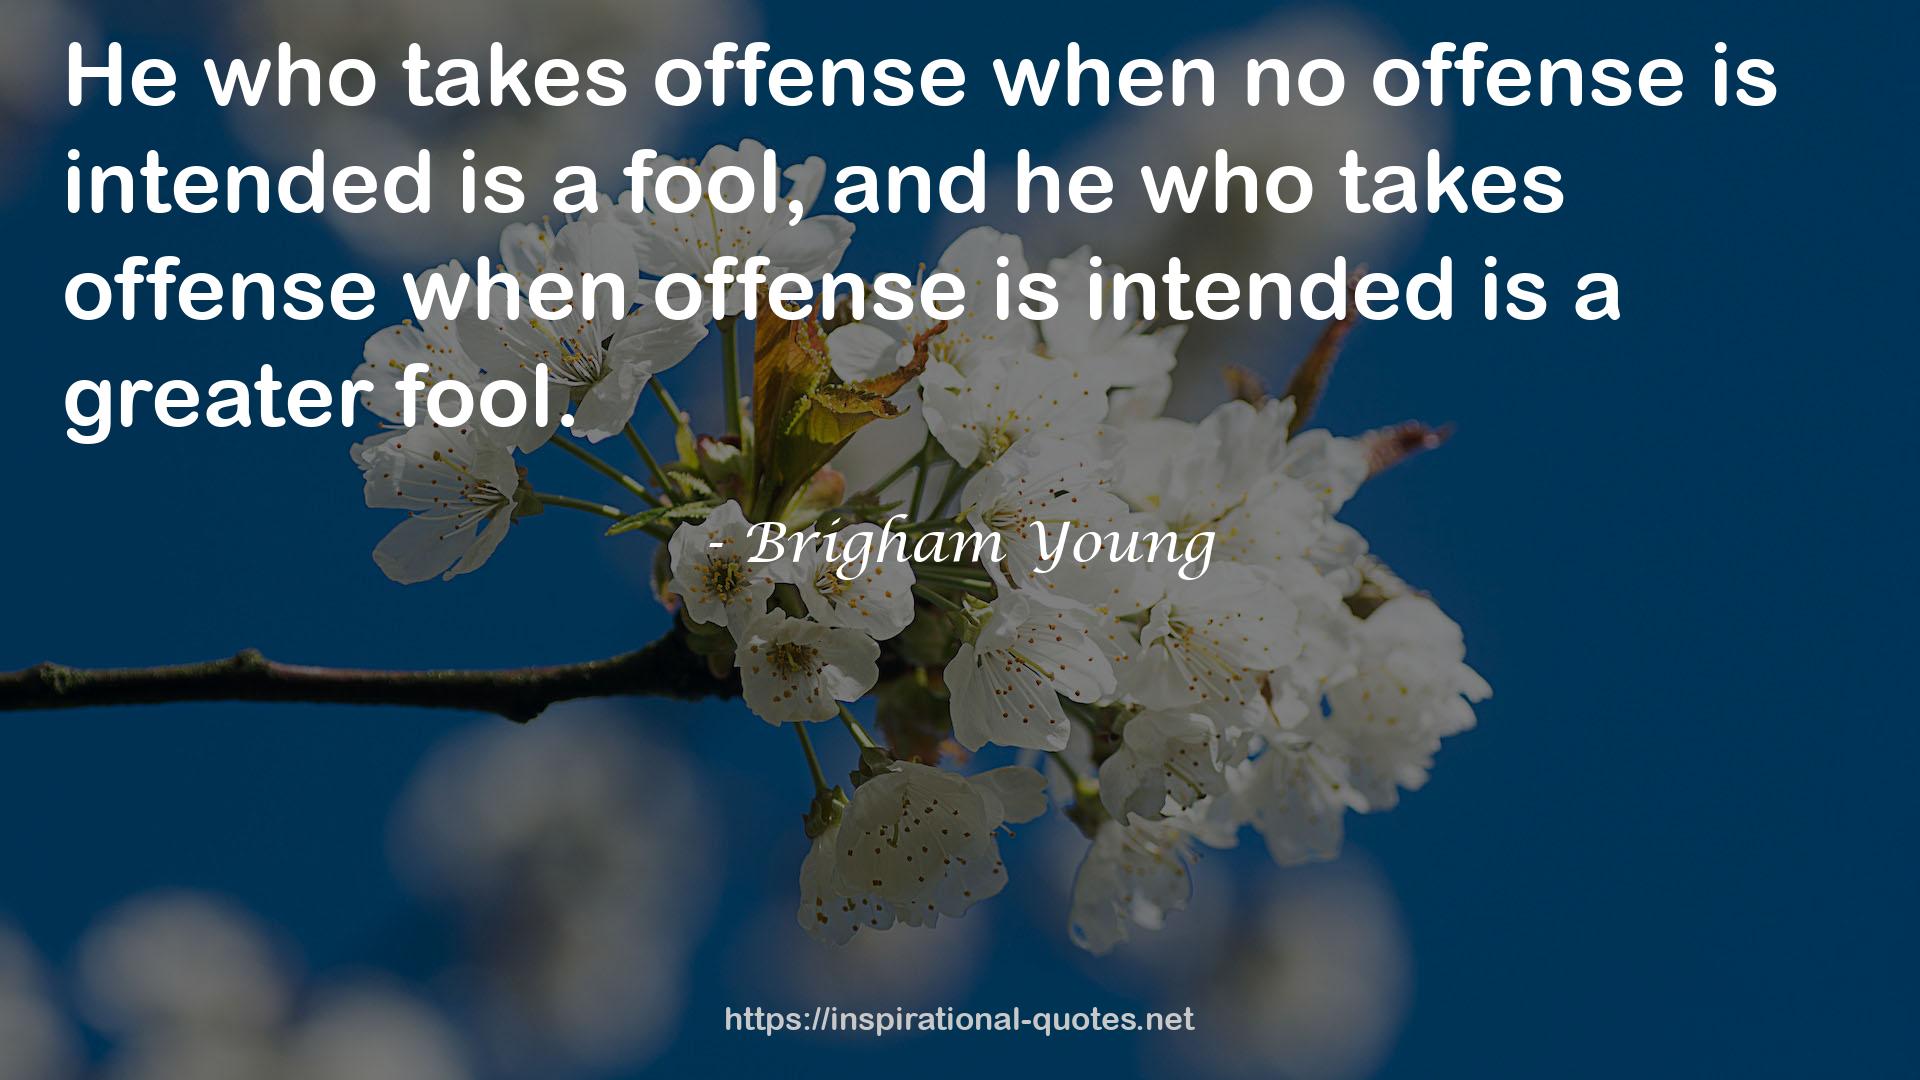 Brigham Young QUOTES